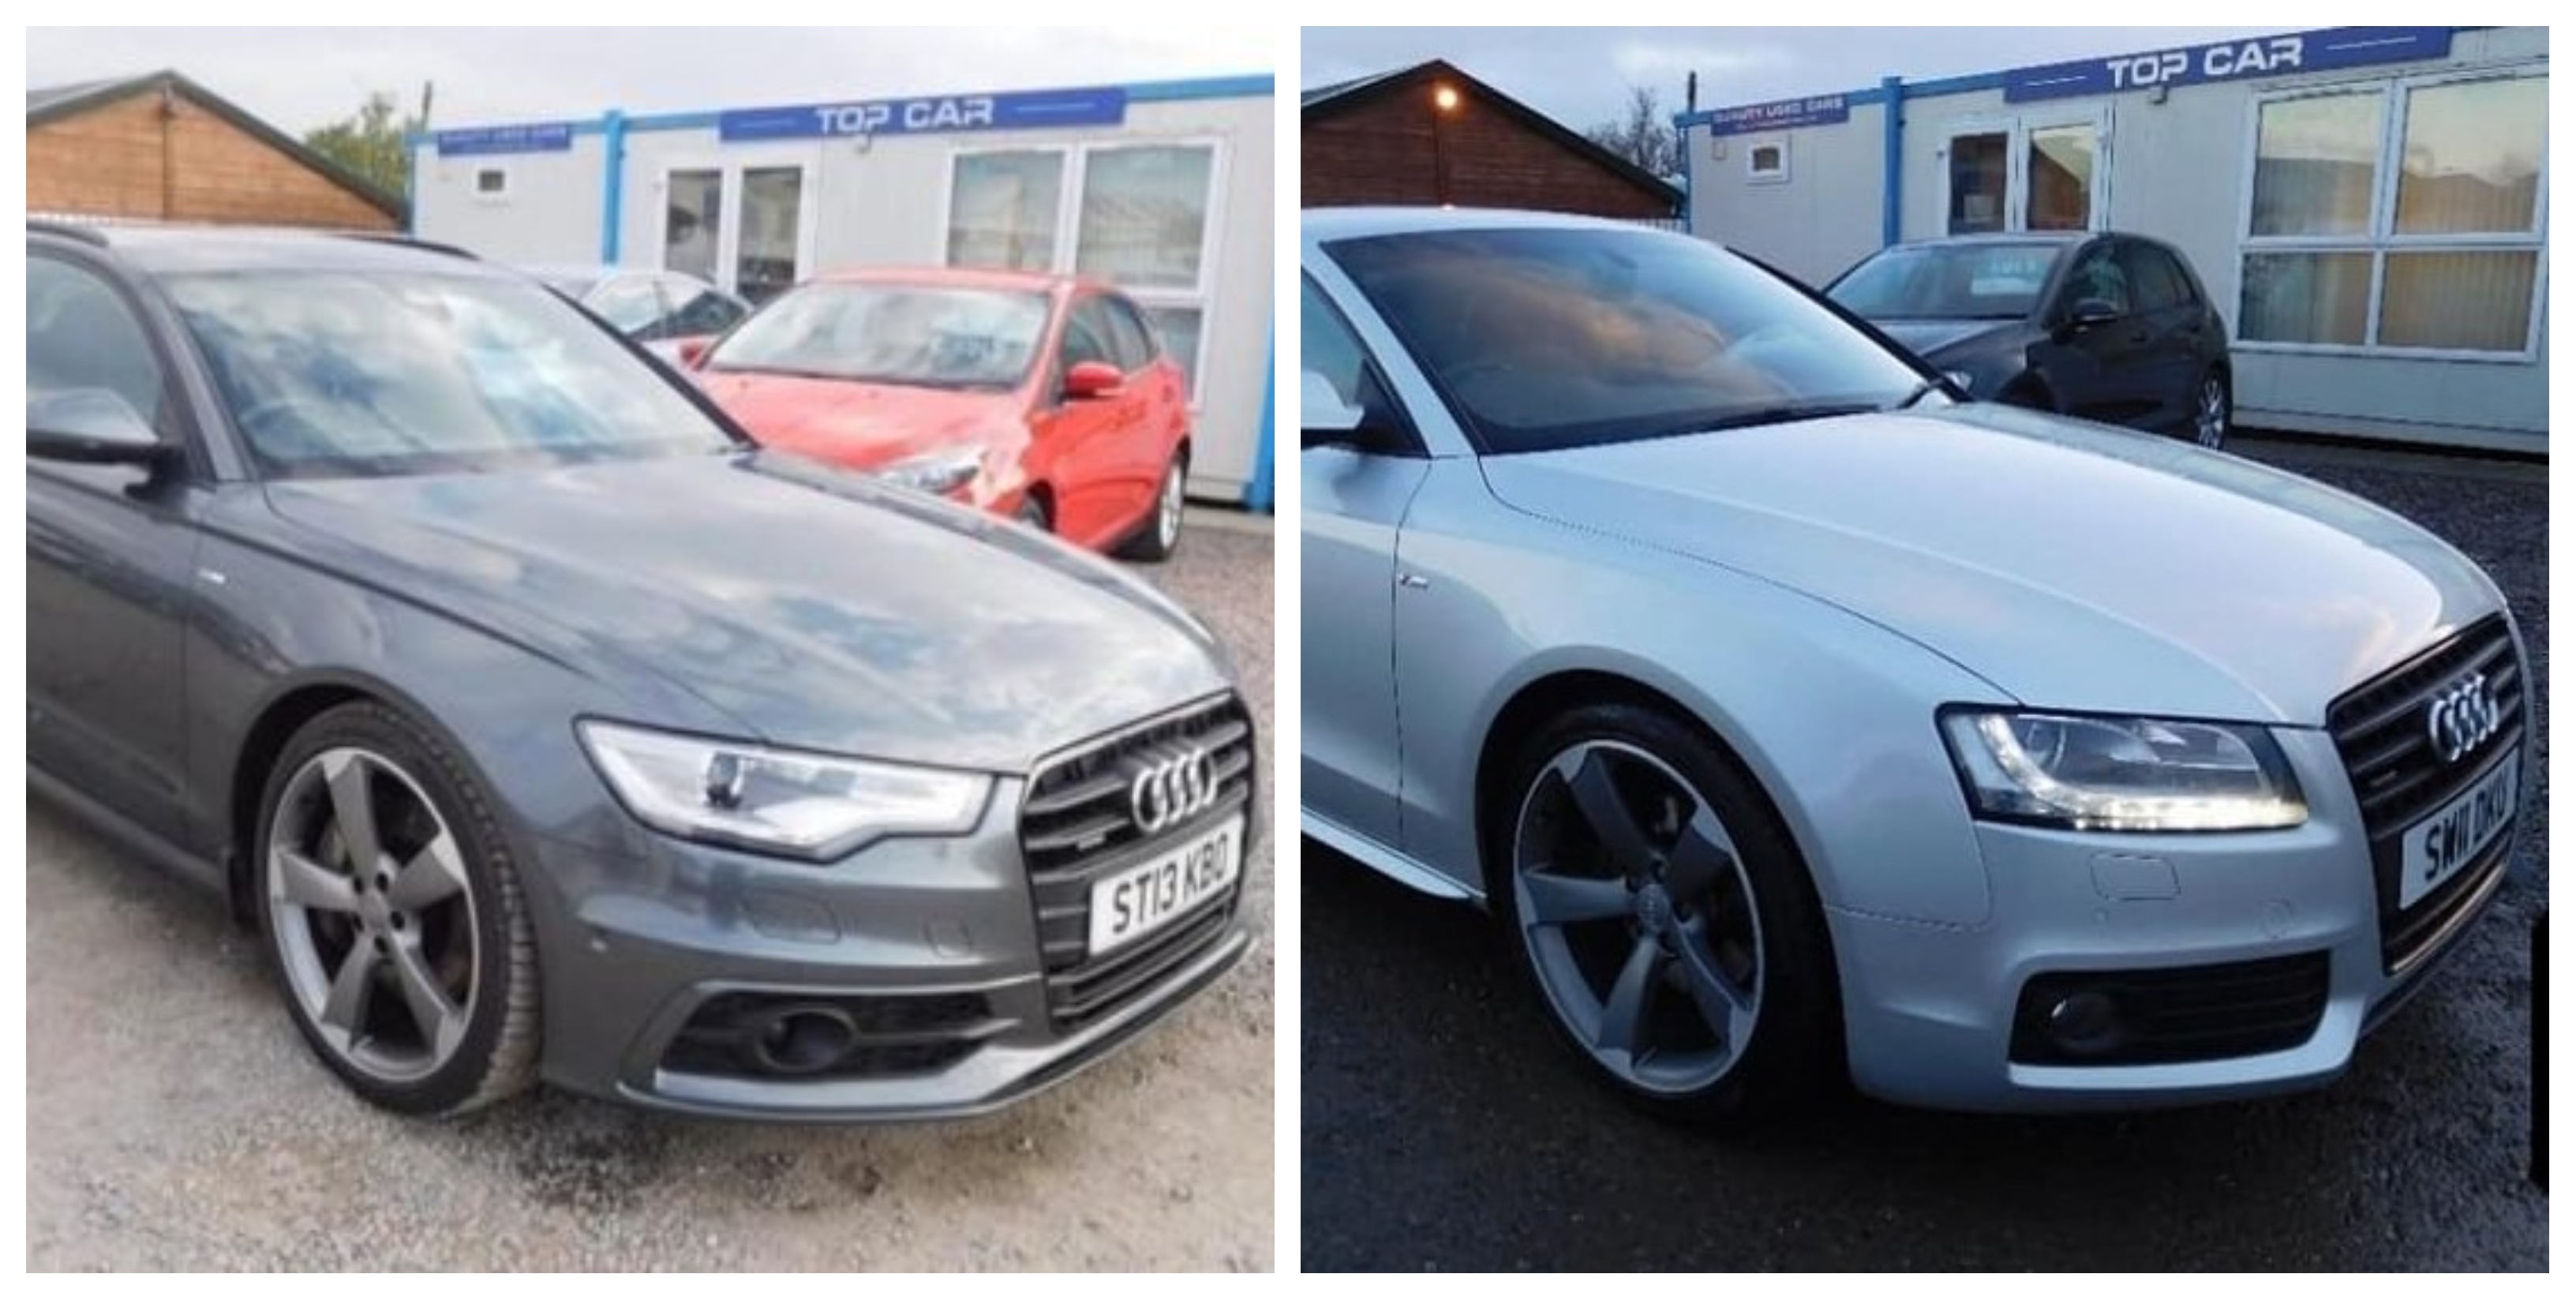 The stolen vehicles from Top Cars Harbour Road in Inverness